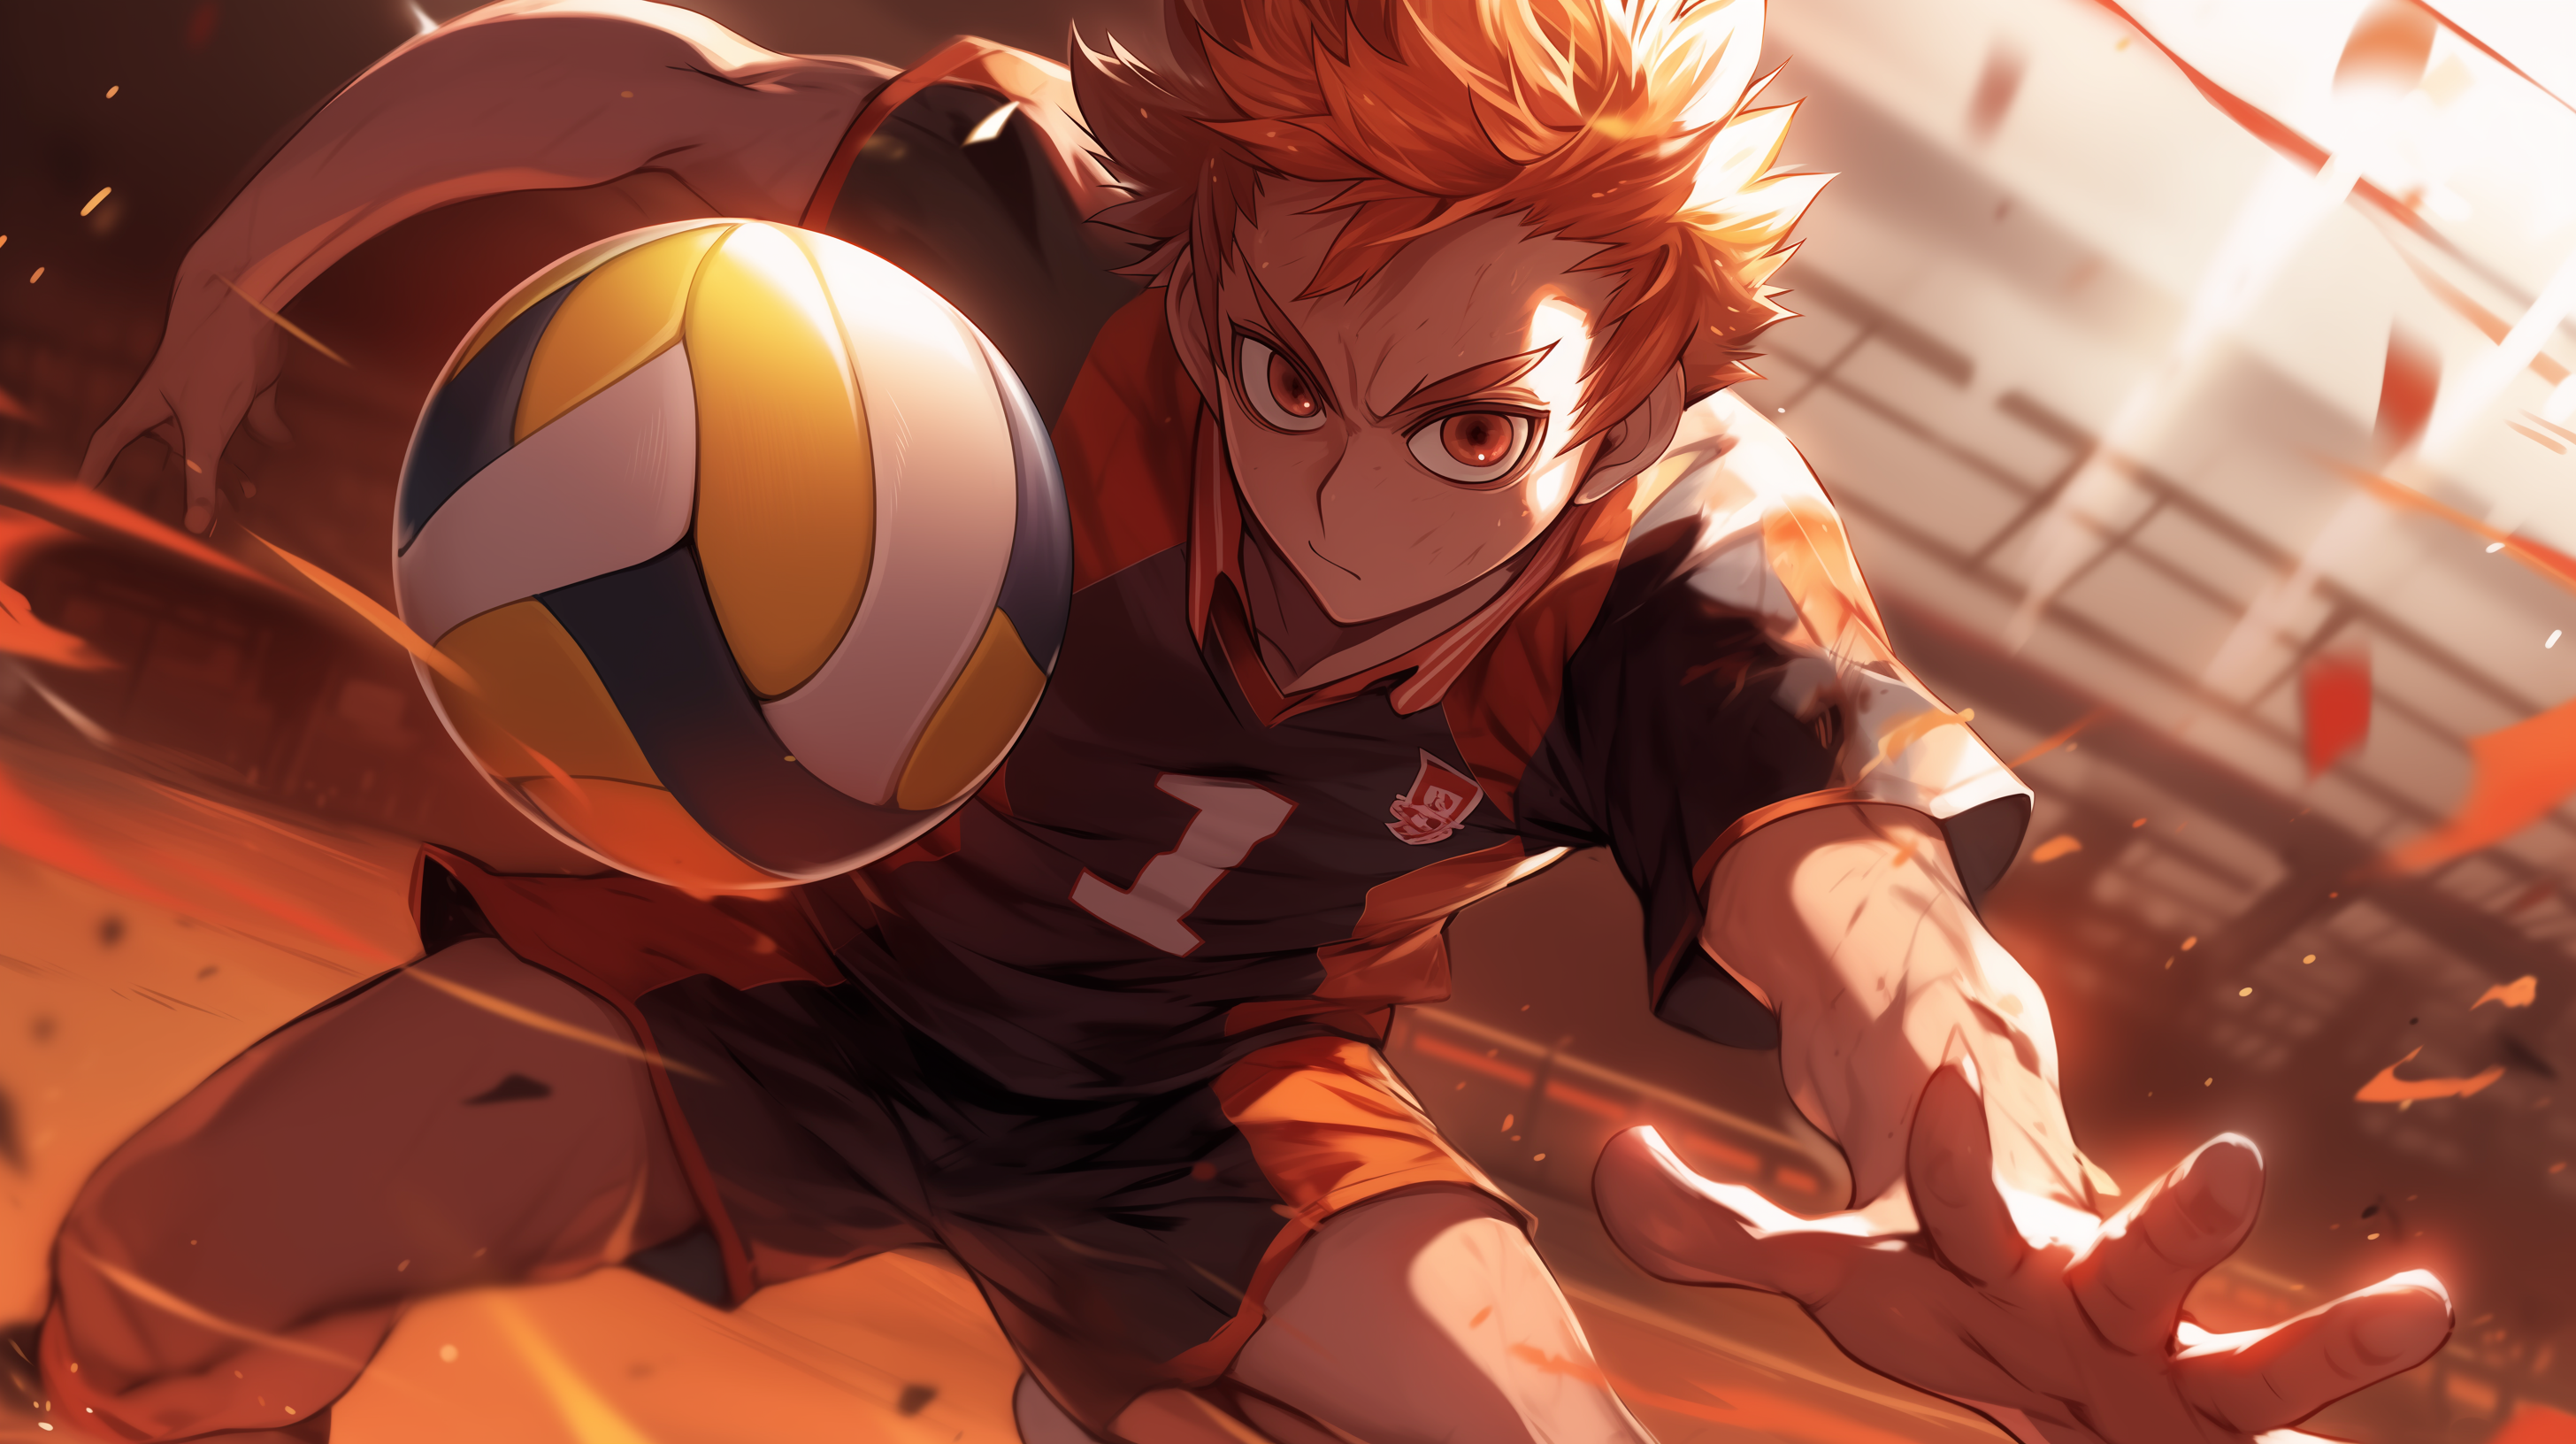 Volleyball anime hot girl